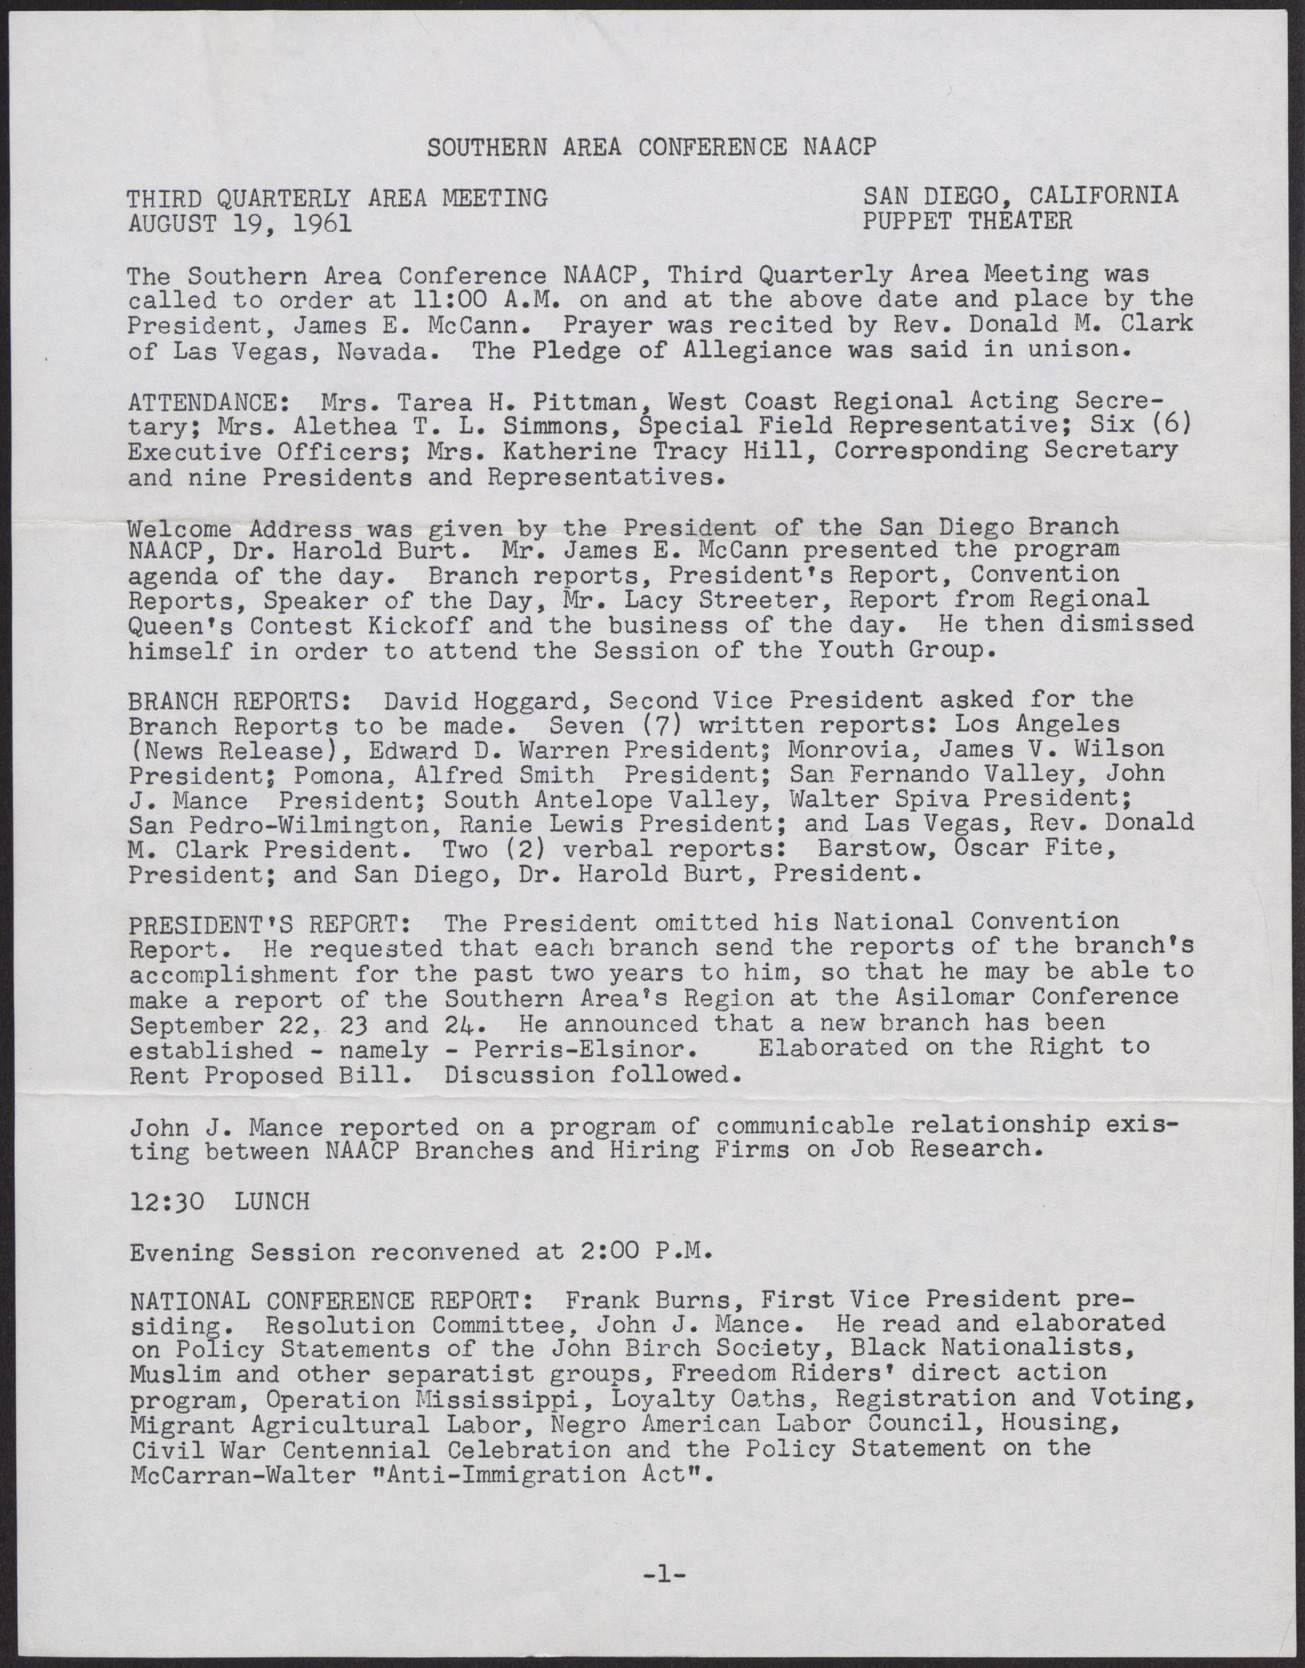 Minutes of the NAACP Third Quarterly Area Meeting of the Southern Area Conference (2 pages), August 19, 1961